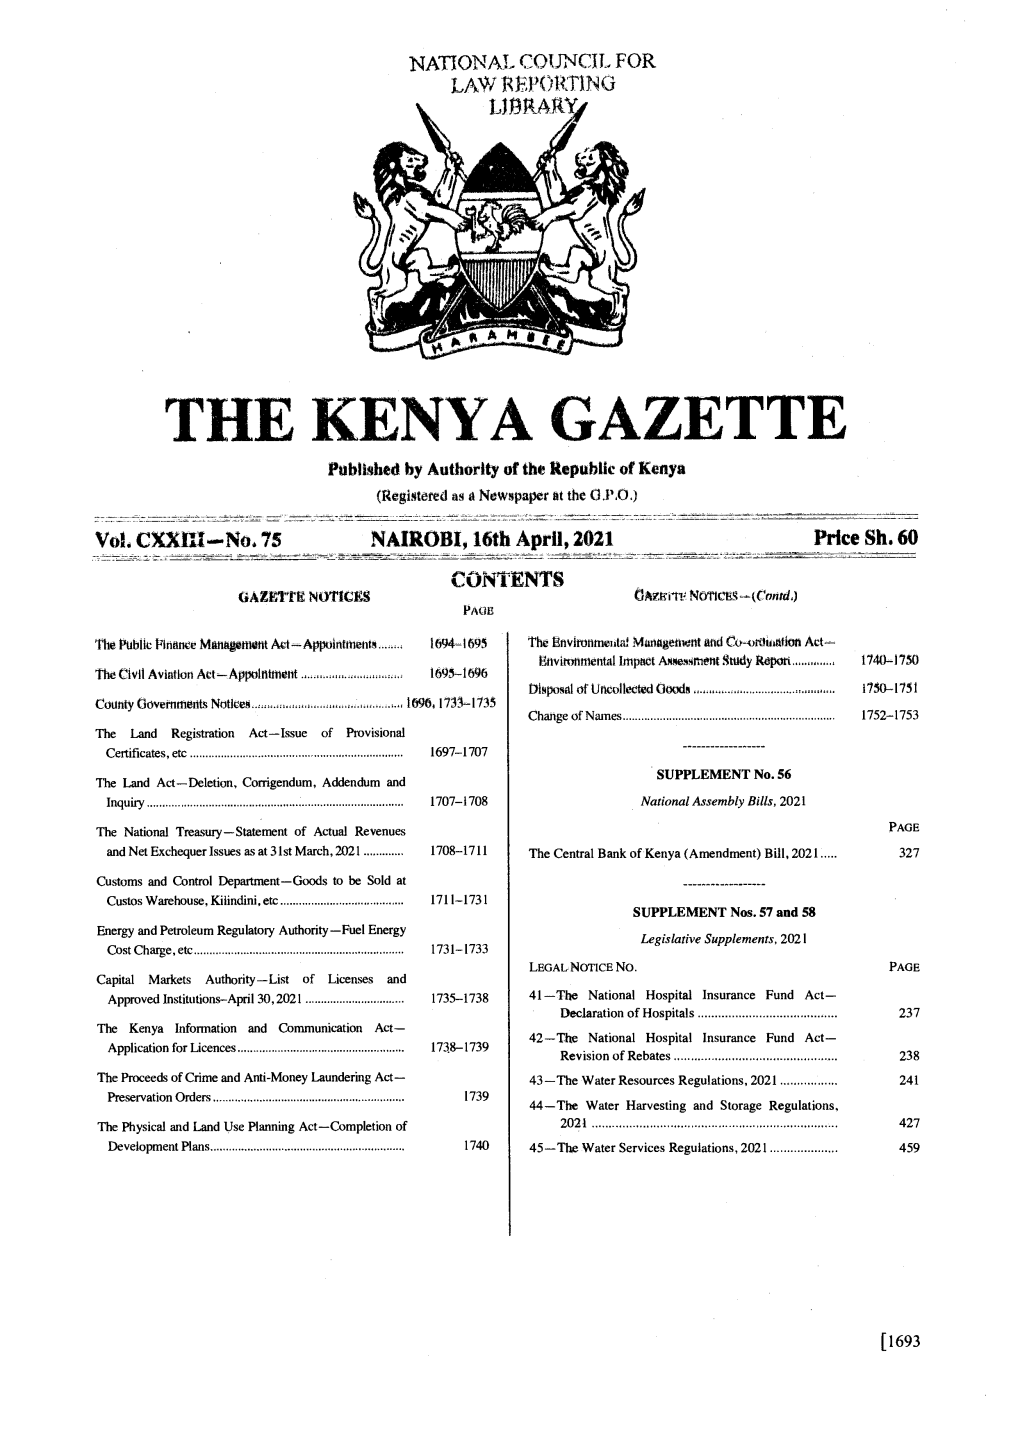 THE KENYA GAZETTE Published by Authority of the Republic of Kenya (Registered As a Newspaper at the 0.P,O.)